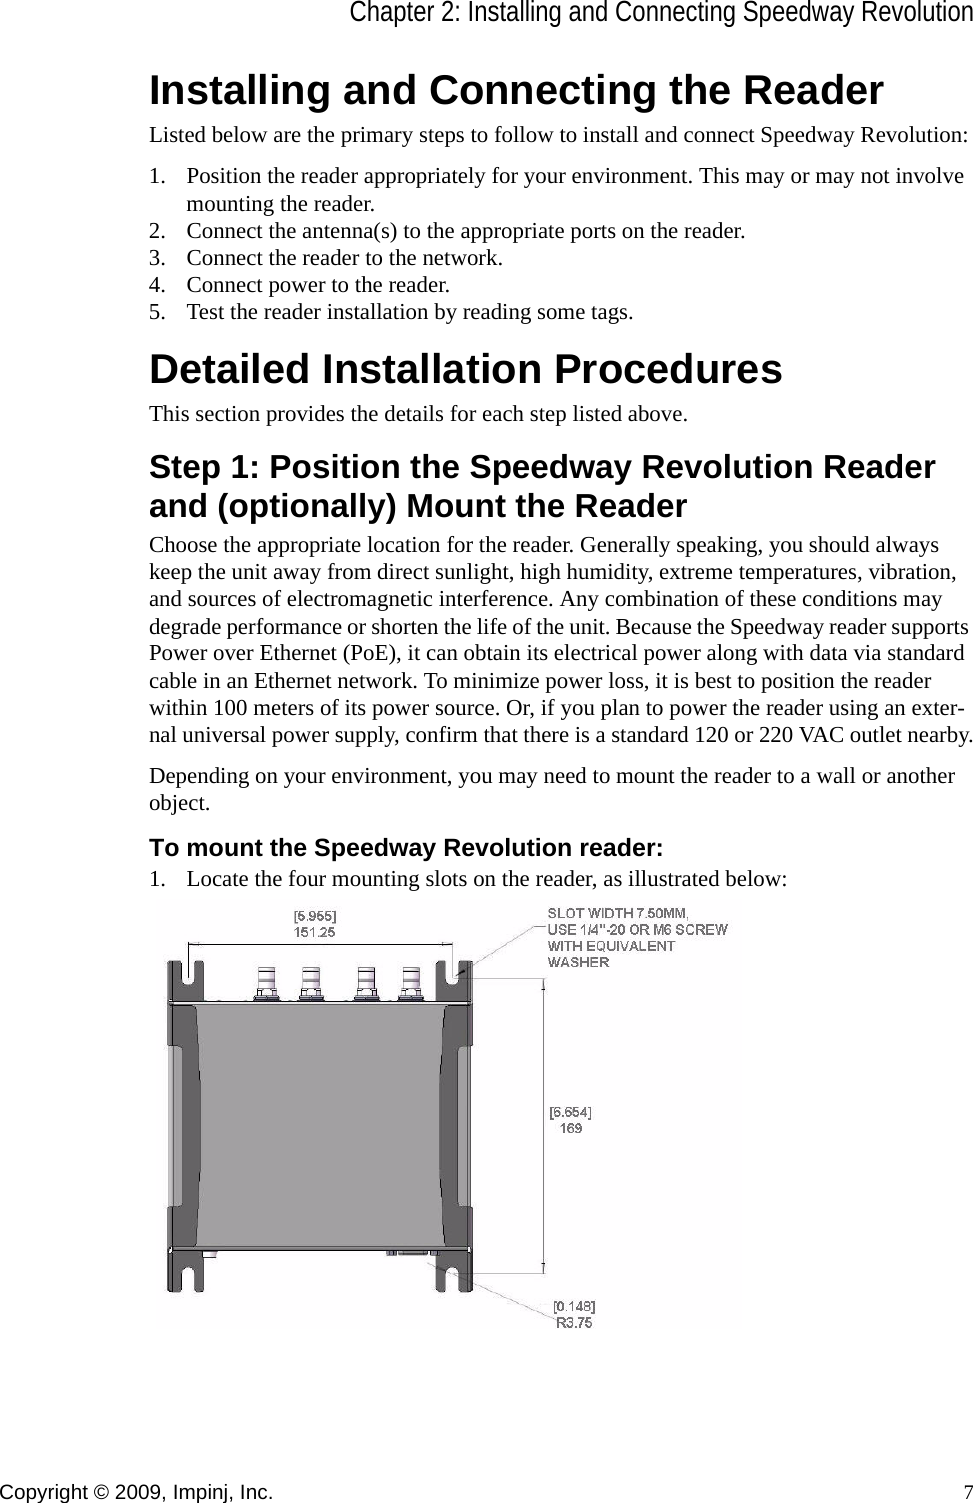 Chapter 2: Installing and Connecting Speedway RevolutionCopyright © 2009, Impinj, Inc. 7Installing and Connecting the ReaderListed below are the primary steps to follow to install and connect Speedway Revolution:1. Position the reader appropriately for your environment. This may or may not involve mounting the reader.2. Connect the antenna(s) to the appropriate ports on the reader.3. Connect the reader to the network.4. Connect power to the reader.5. Test the reader installation by reading some tags.Detailed Installation ProceduresThis section provides the details for each step listed above.Step 1: Position the Speedway Revolution Reader and (optionally) Mount the ReaderChoose the appropriate location for the reader. Generally speaking, you should always keep the unit away from direct sunlight, high humidity, extreme temperatures, vibration, and sources of electromagnetic interference. Any combination of these conditions may degrade performance or shorten the life of the unit. Because the Speedway reader supports Power over Ethernet (PoE), it can obtain its electrical power along with data via standard cable in an Ethernet network. To minimize power loss, it is best to position the reader within 100 meters of its power source. Or, if you plan to power the reader using an exter-nal universal power supply, confirm that there is a standard 120 or 220 VAC outlet nearby.Depending on your environment, you may need to mount the reader to a wall or another object.To mount the Speedway Revolution reader:1. Locate the four mounting slots on the reader, as illustrated below: 